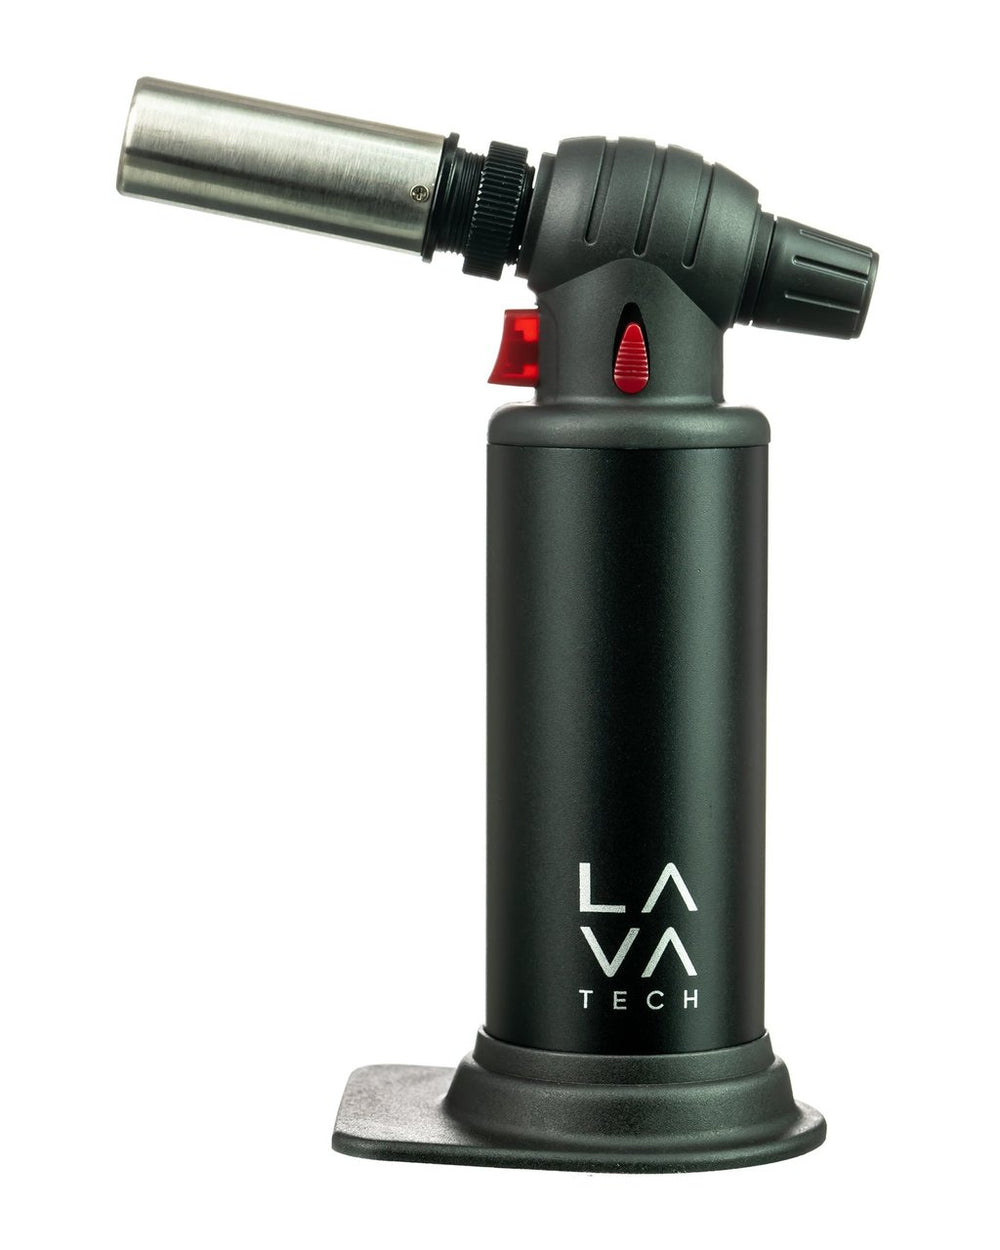 Dab Torch LavaTech - "Ember" Jet Flame Torch